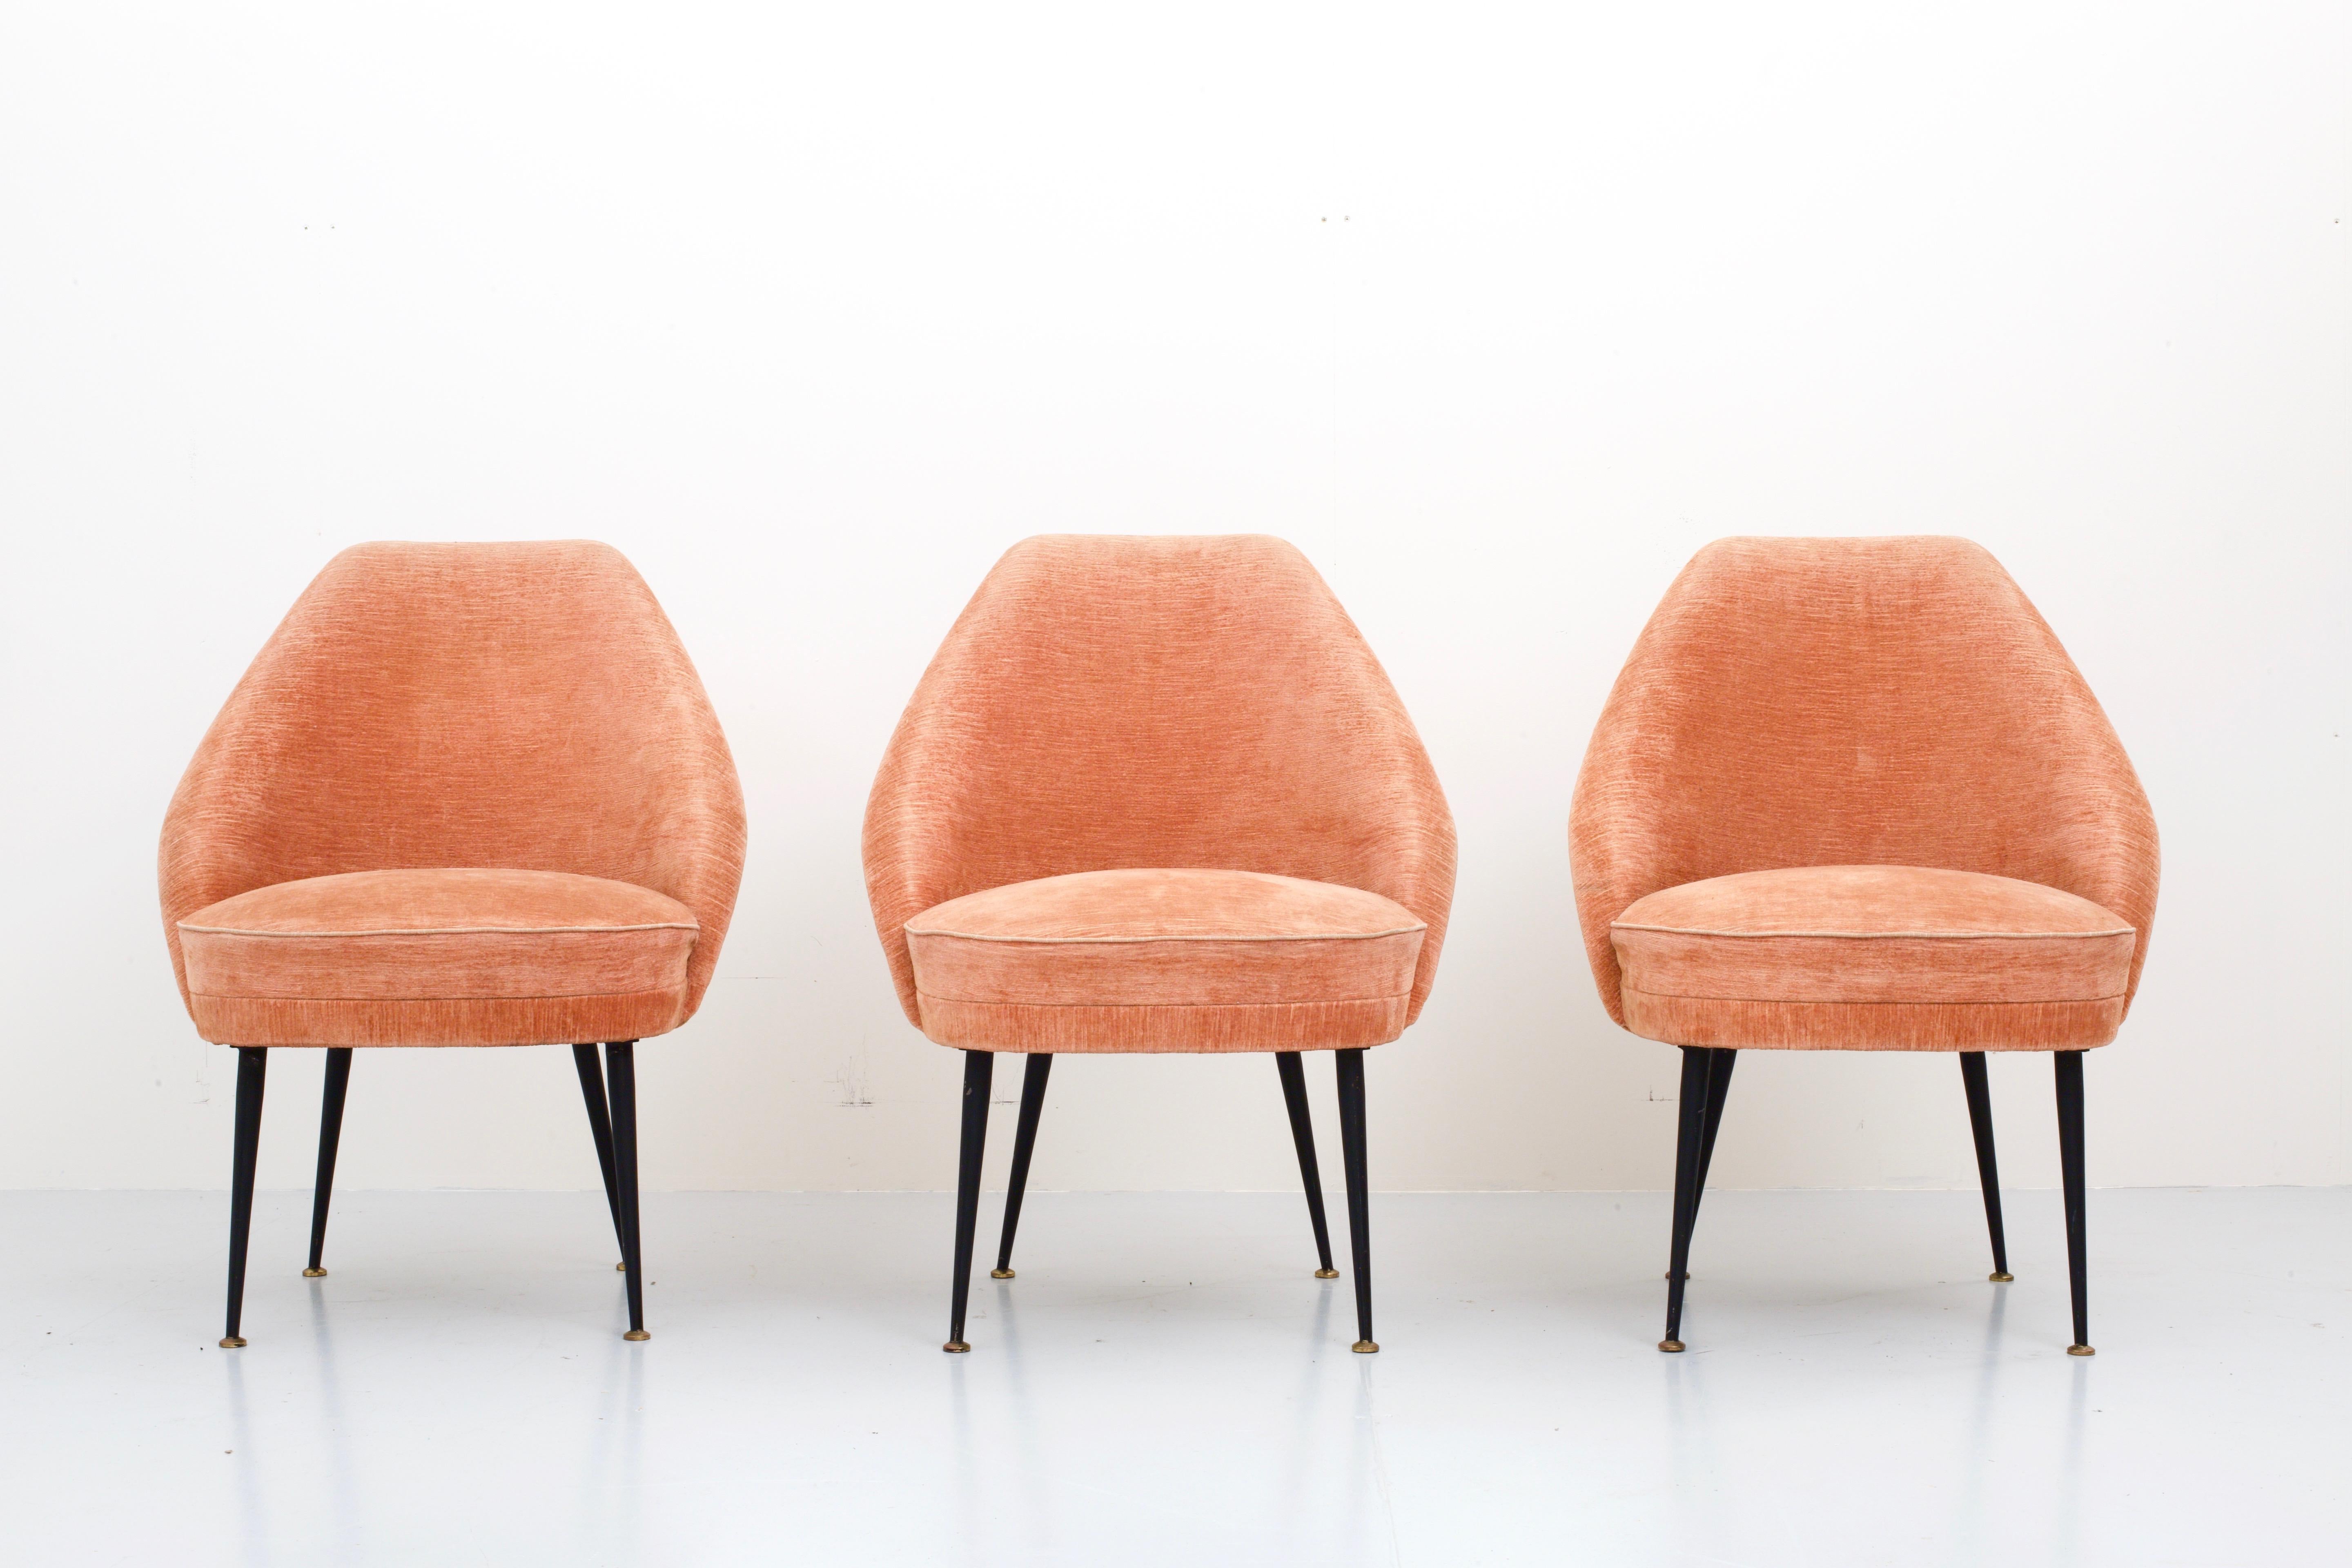 Set of three ‘Campanula’ lounge chairs in pink Velvet by Carlo Pagano for Arflex, Italy, 1952.

Very comfortable and elegant low lounge chairs with nice round shapes in the backrest. Solid legs made out of metal and brass give them the Italian